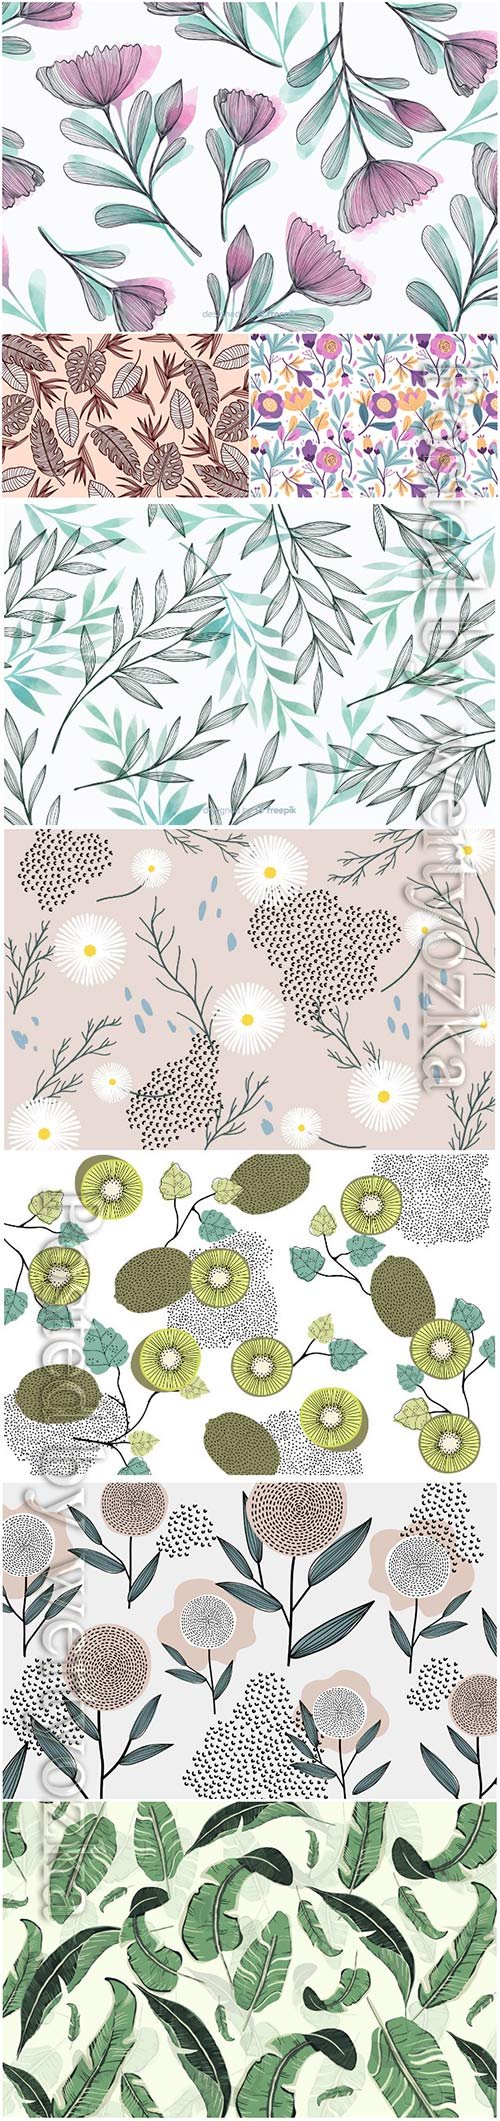 Seamless floral vector backgrounds